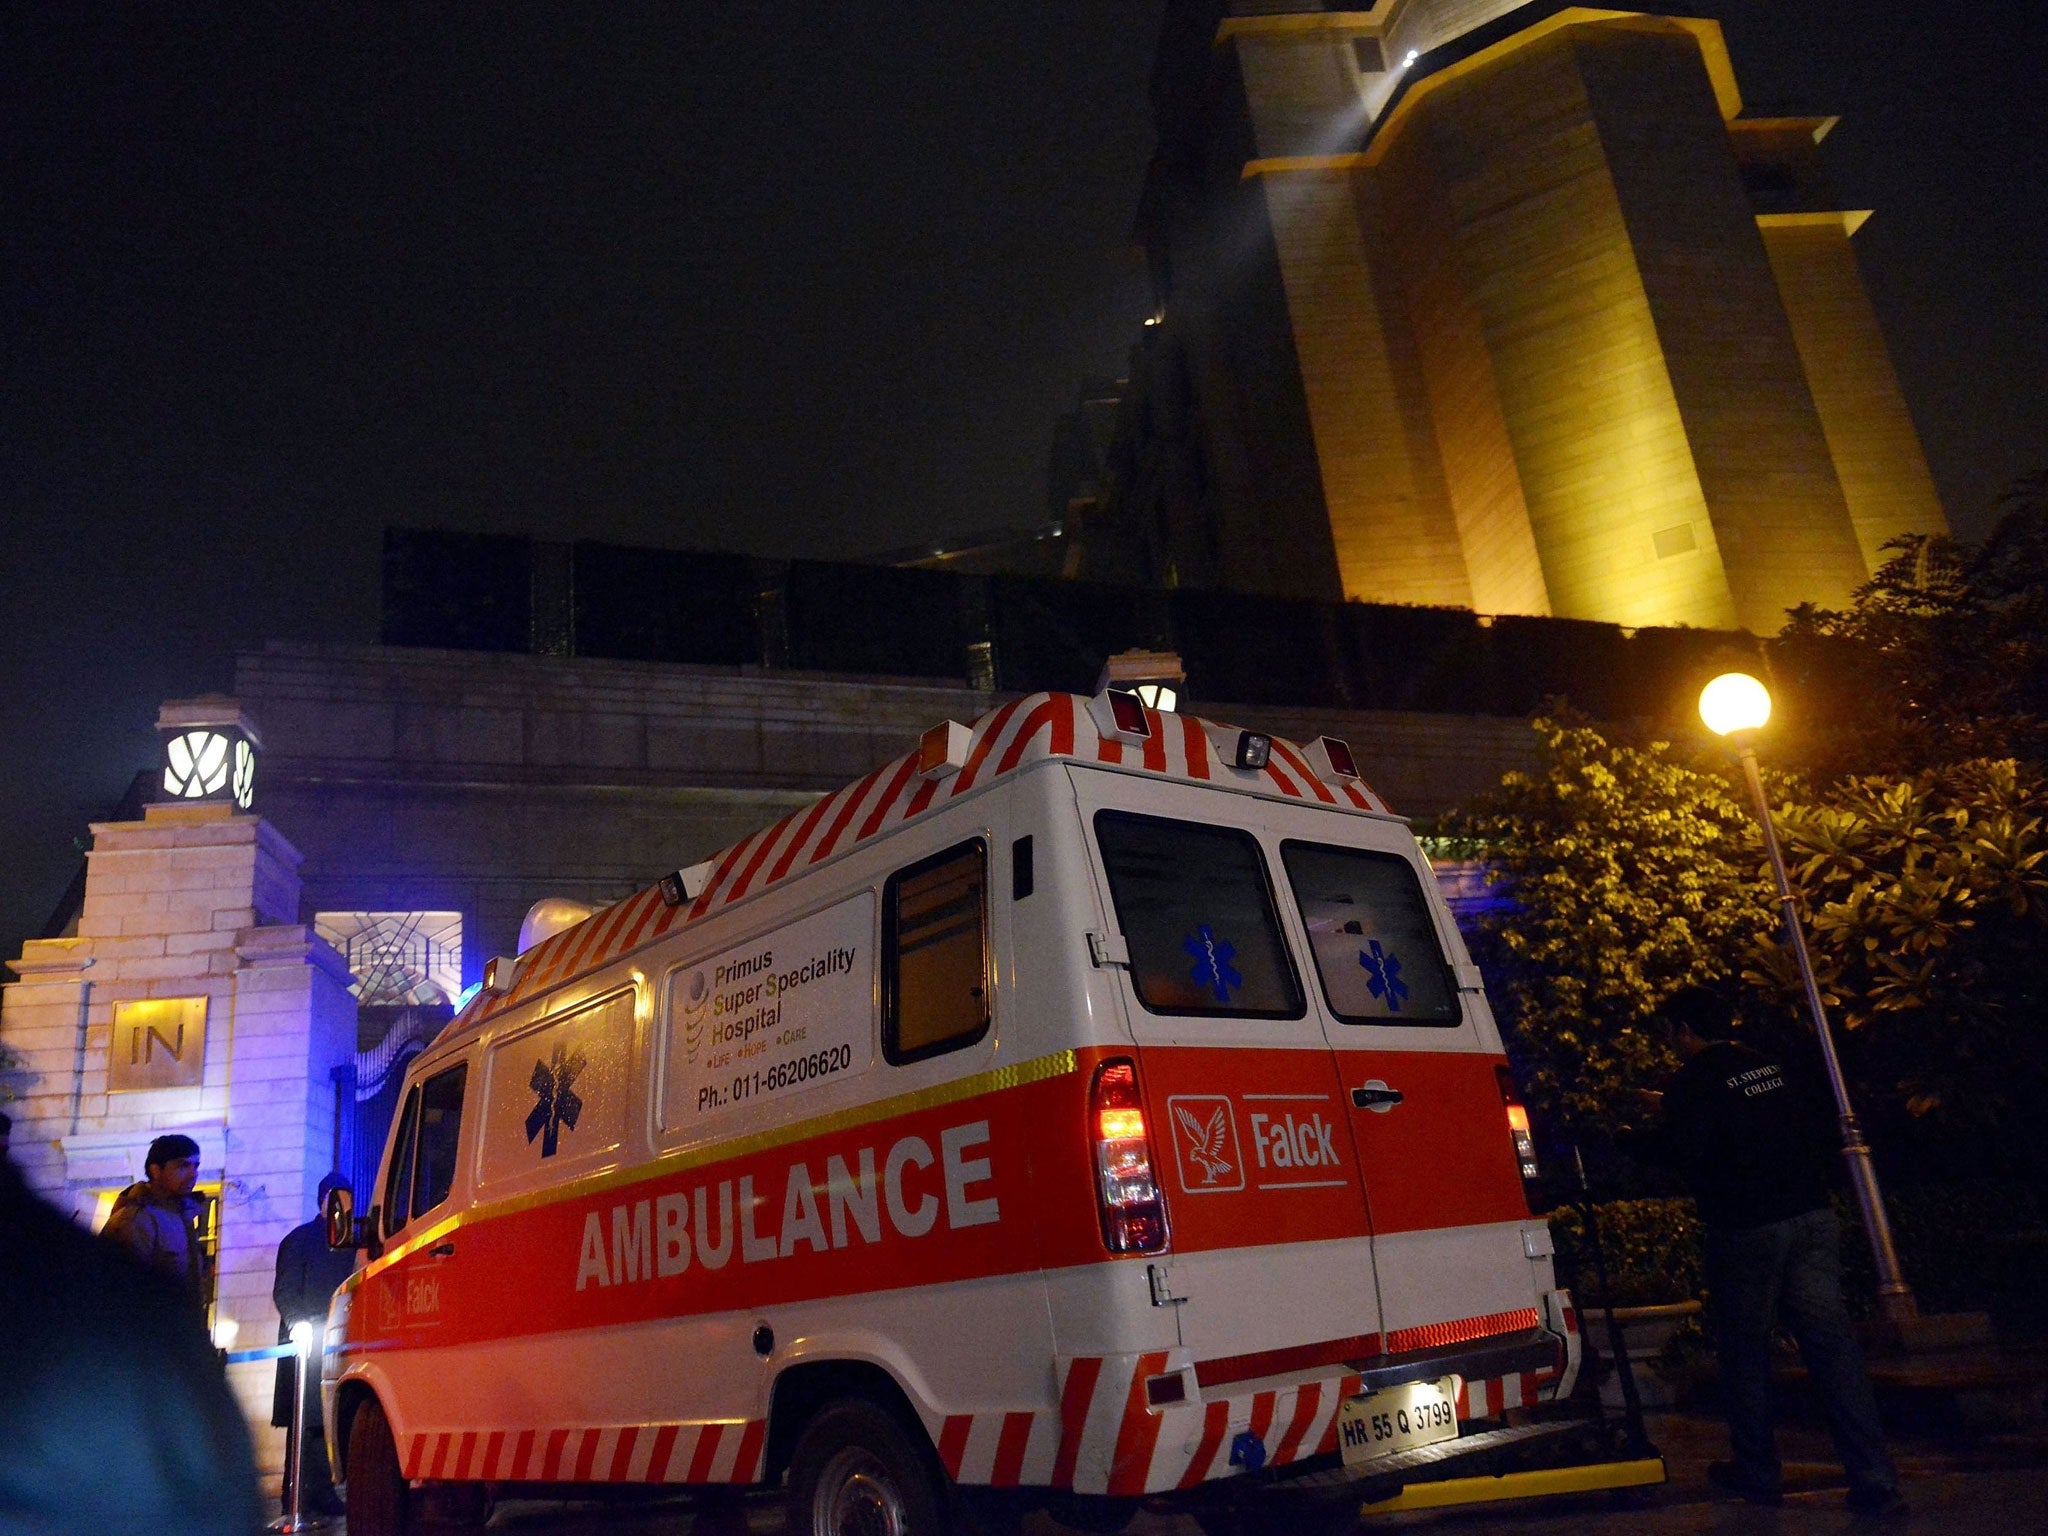 An ambulance arrives at the Leela Hotel in New Delhi where wife of Indian minister Shashi Tharoor, Sunanda Pushkar was found dead